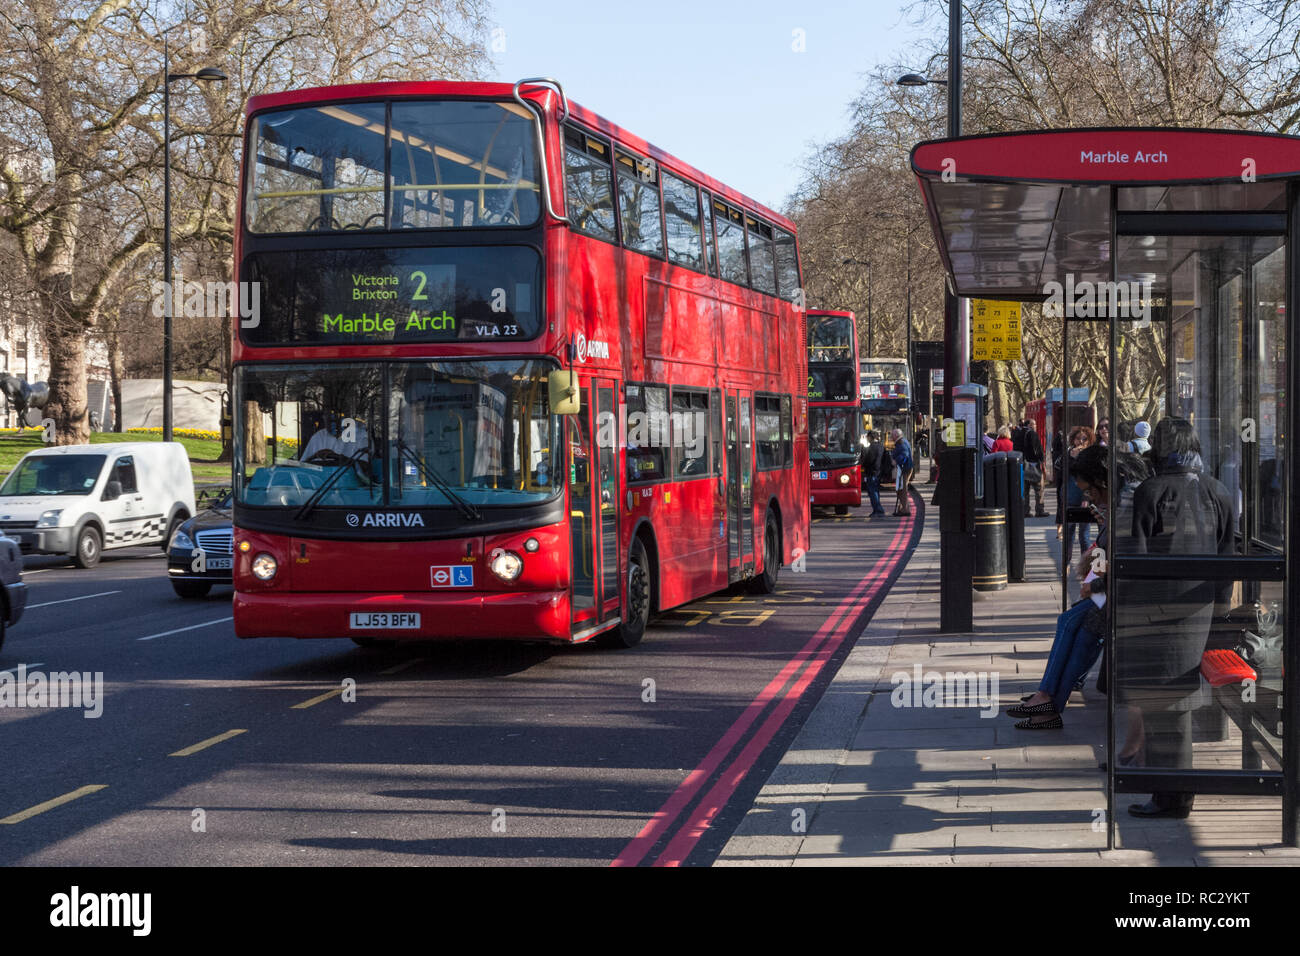 A double decker Arriva London bus, pulling away from a bus stop on a busy road, Marble Arch, London, England, UK Stock Photo